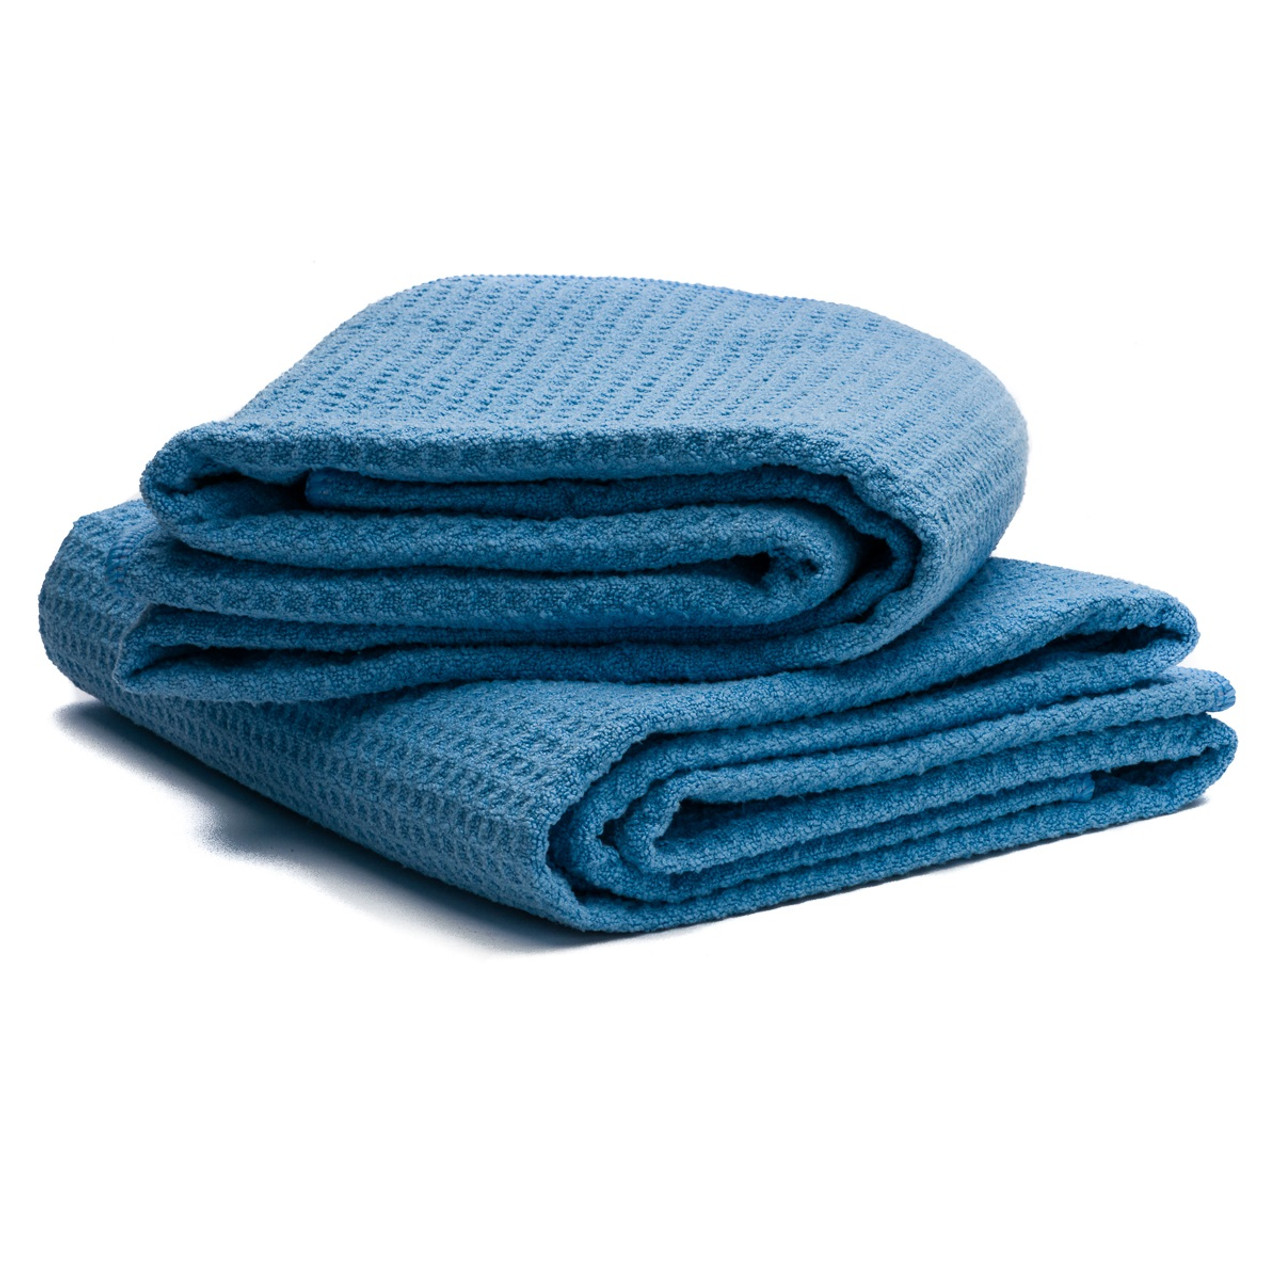 Poorboy's World Waffle Weave Drying Towel 24x36" - 2 Pack